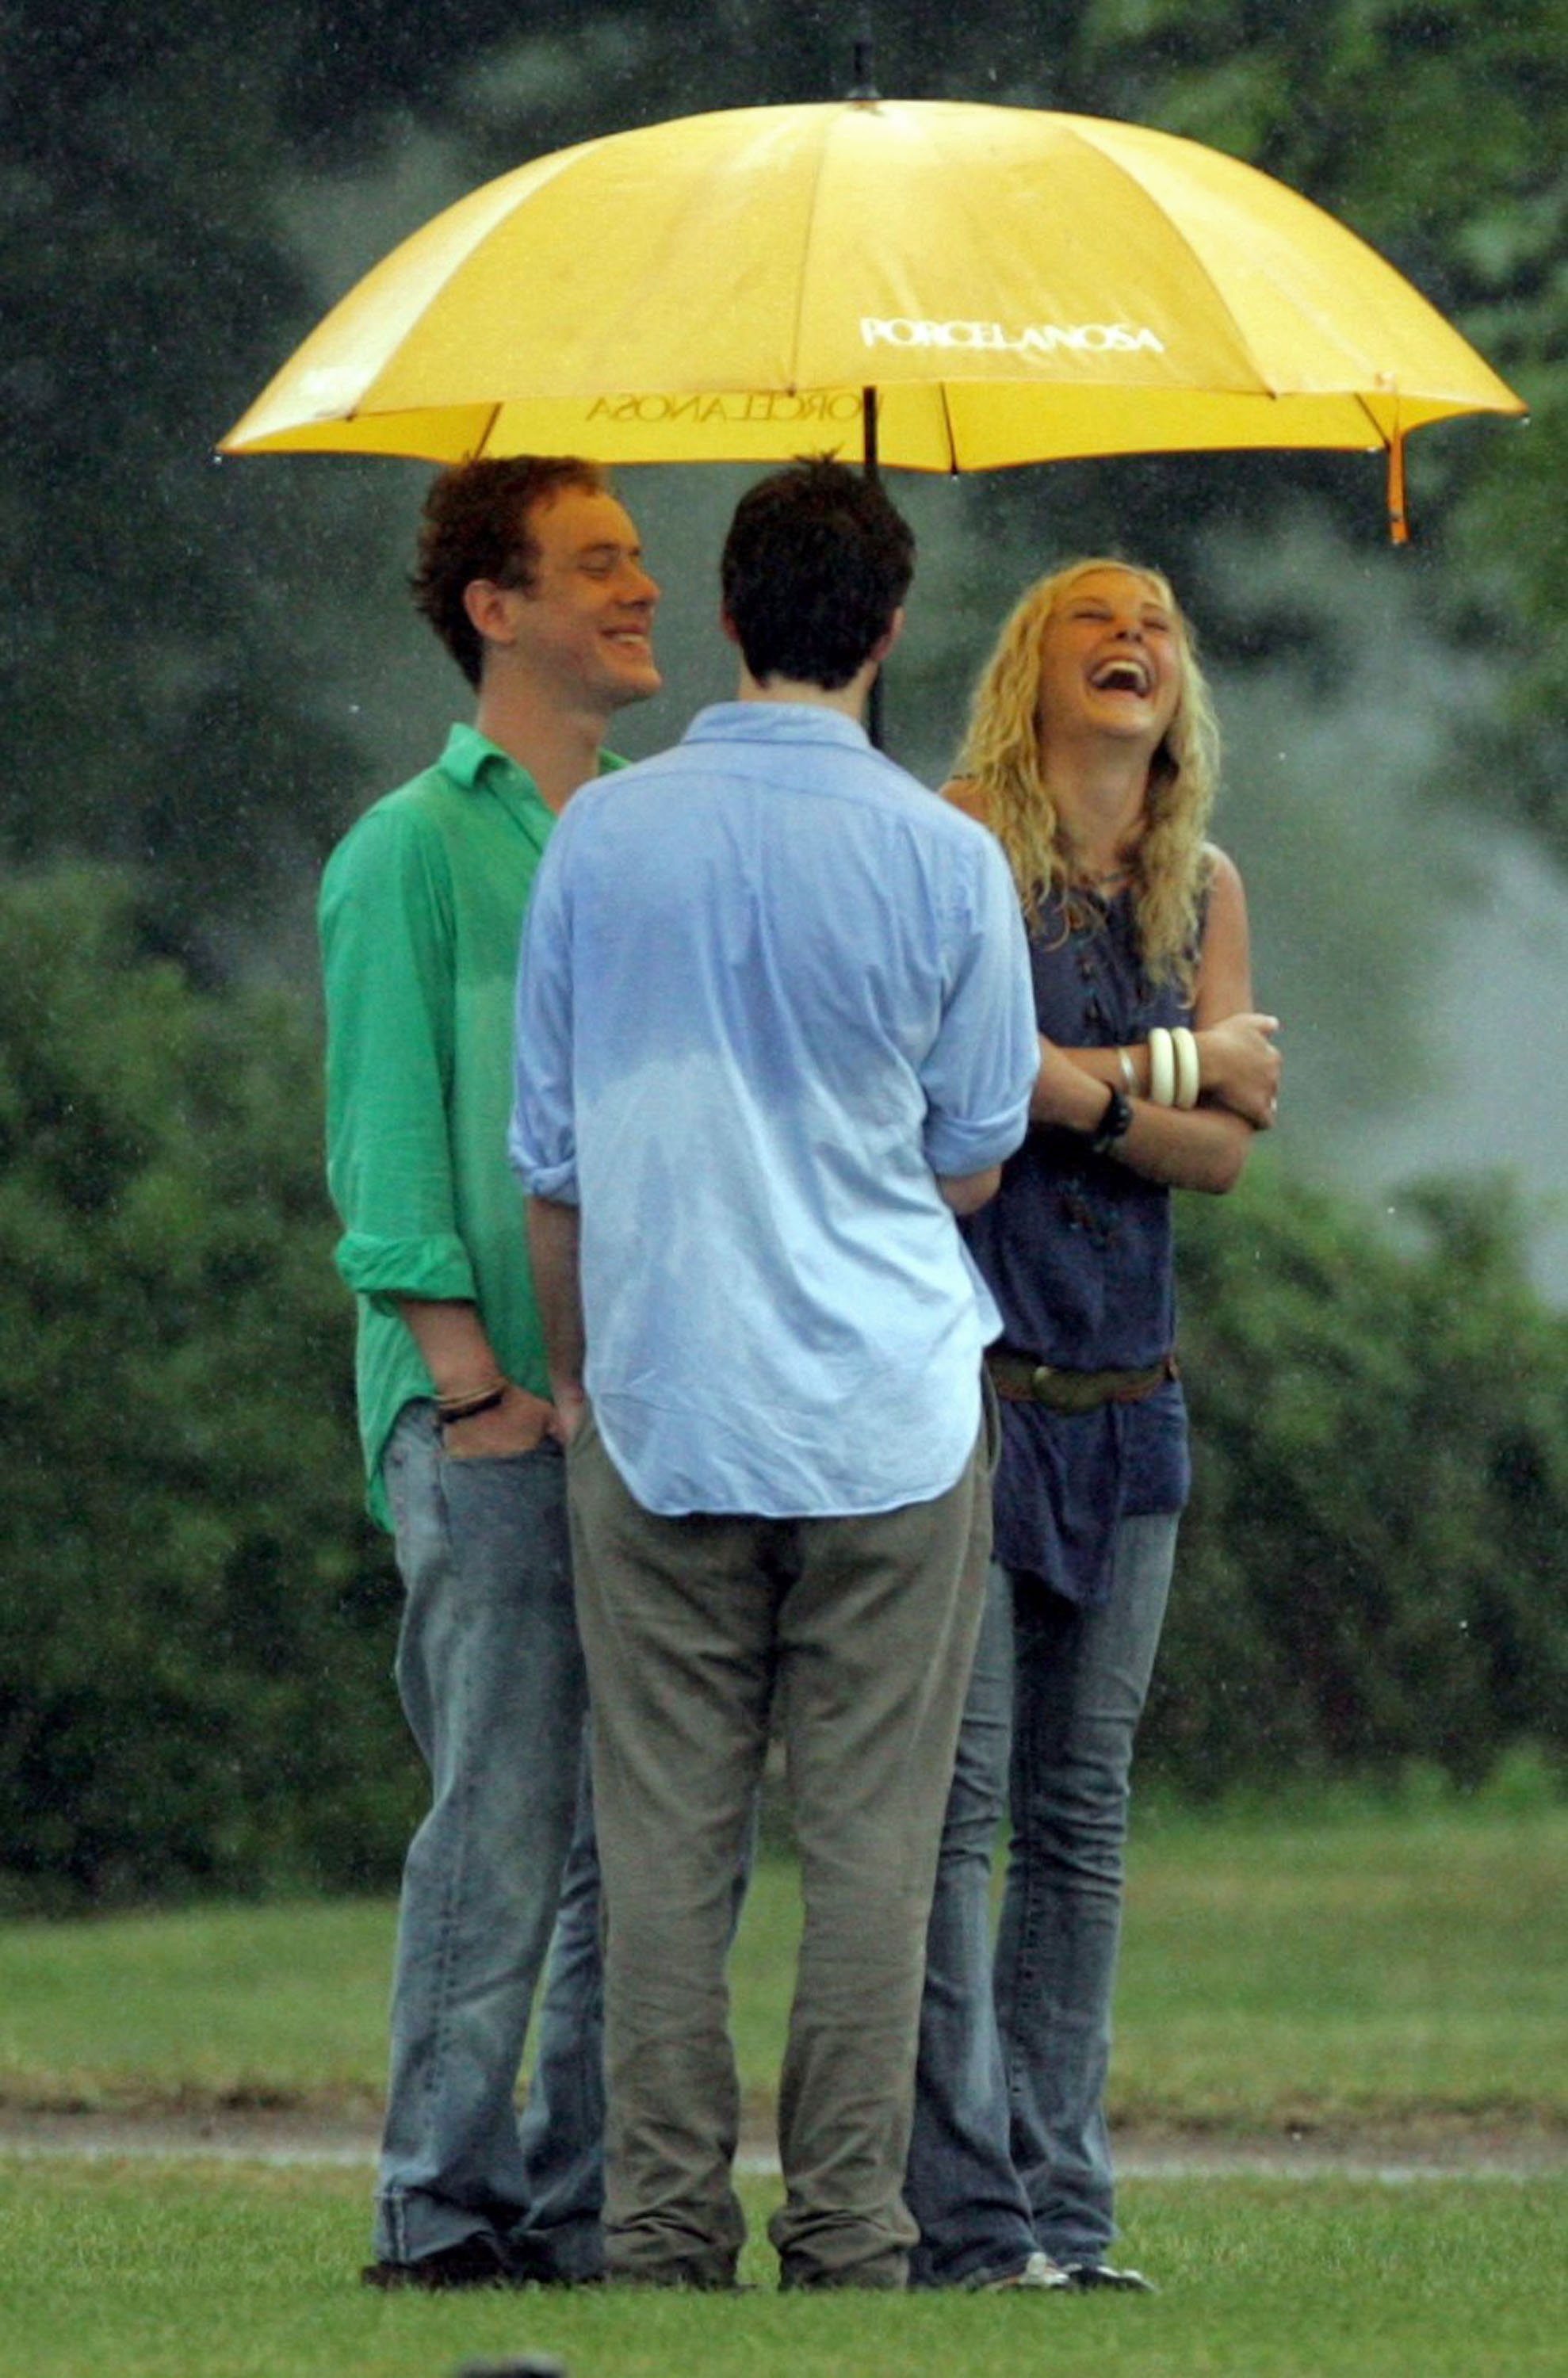 Prince Harry's former girlfriend Chelsy Davy pictured laughing with Prince Harry's friends Guy Pelly (L) and James Murray Wells (C) during the polo day at Cirencester Park Polo Club on July 22, 2006 in Cirencester, England. | Source: Getty Images